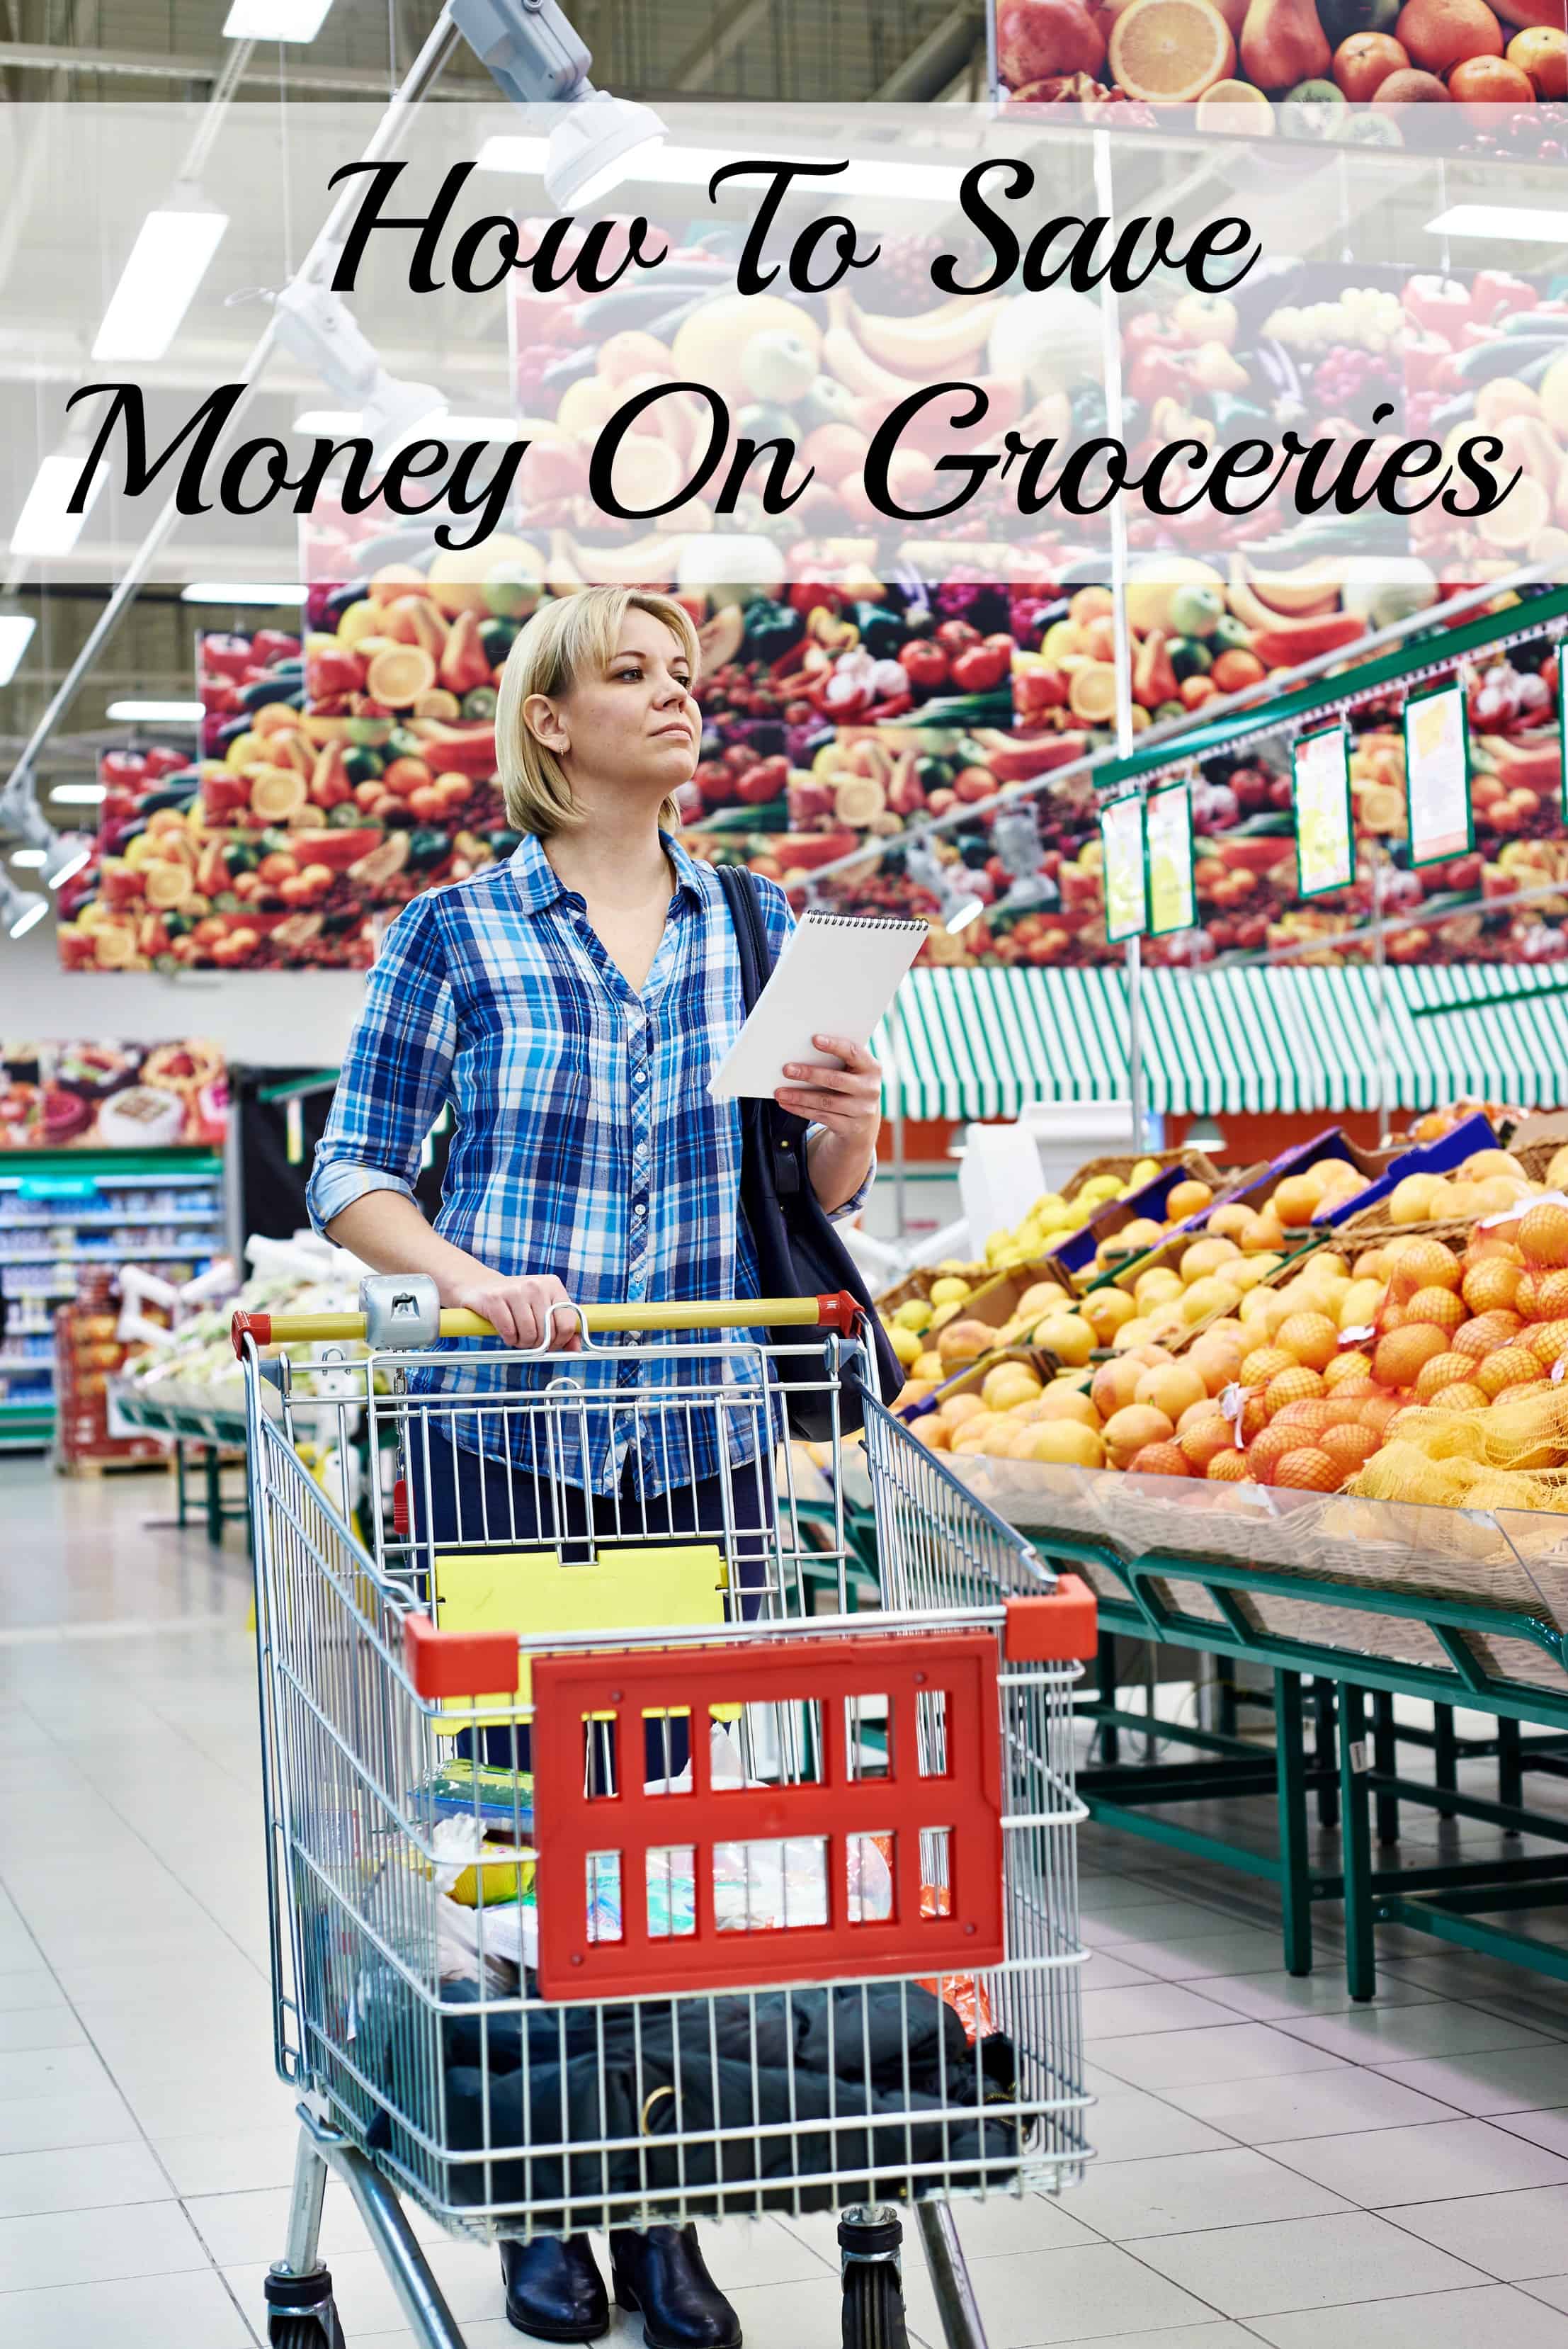 The grocery store shouldn't break the bank. Here are 7 Tips On How To Save Money On Groceries that leave extra cash in your pocket! - Farmer's Wife Rambles